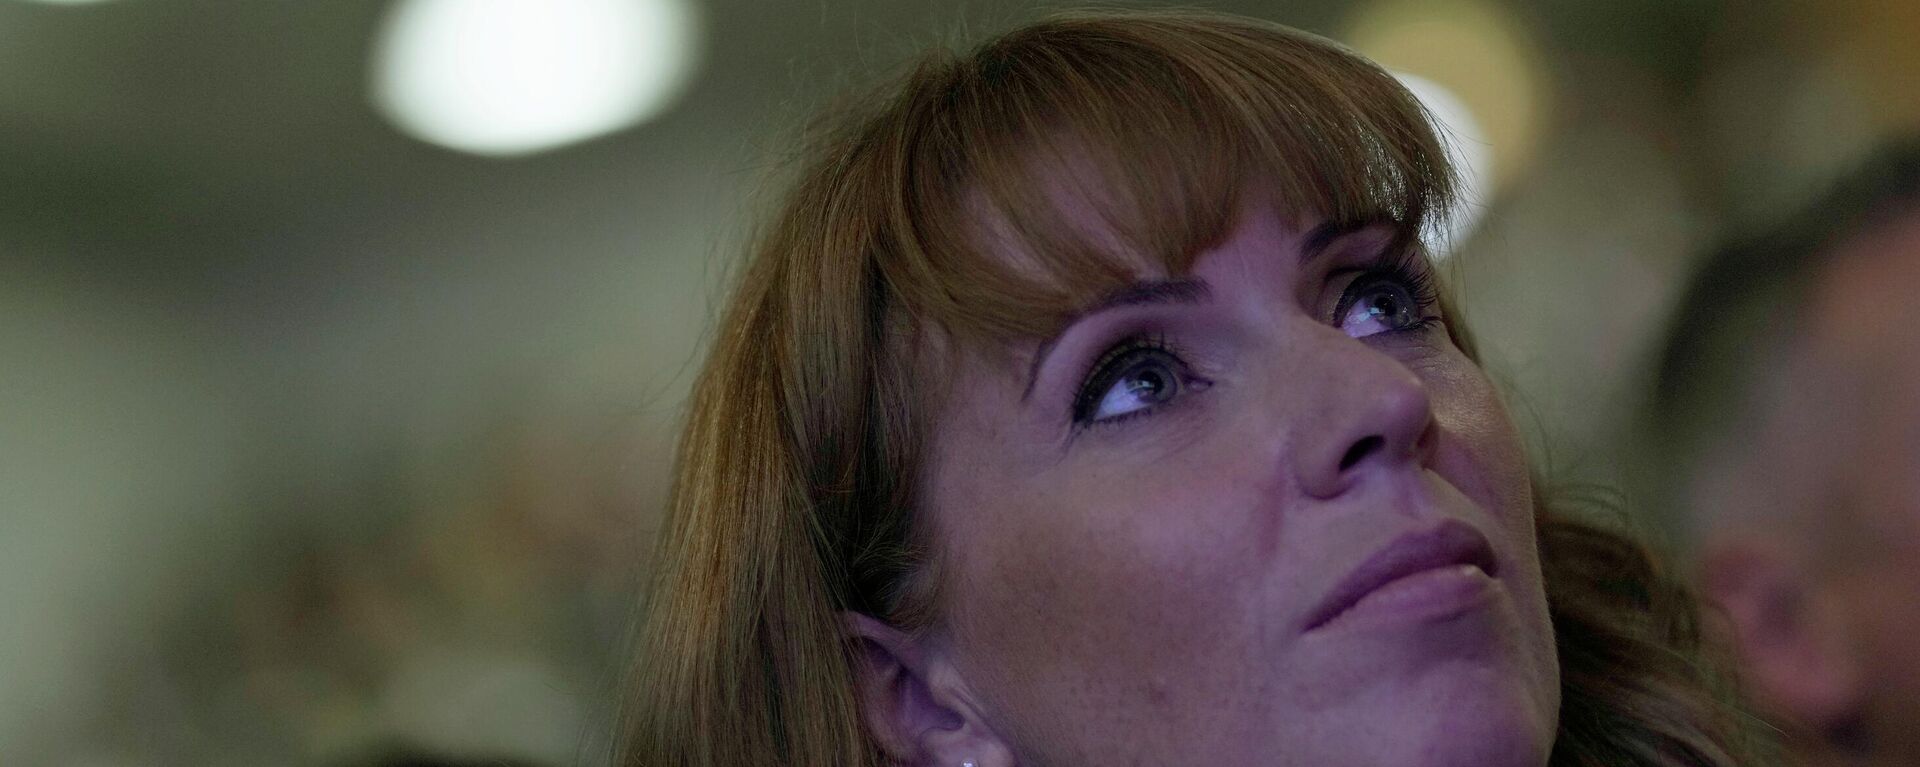 Labour deputy leader Angela Rayner watches as the leader of the British Labour Party Keir Starmer makes his keynote speech at the annual party conference in Brighton, England, Wednesday, Sept. 29, 2021.  - Sputnik International, 1920, 24.04.2022